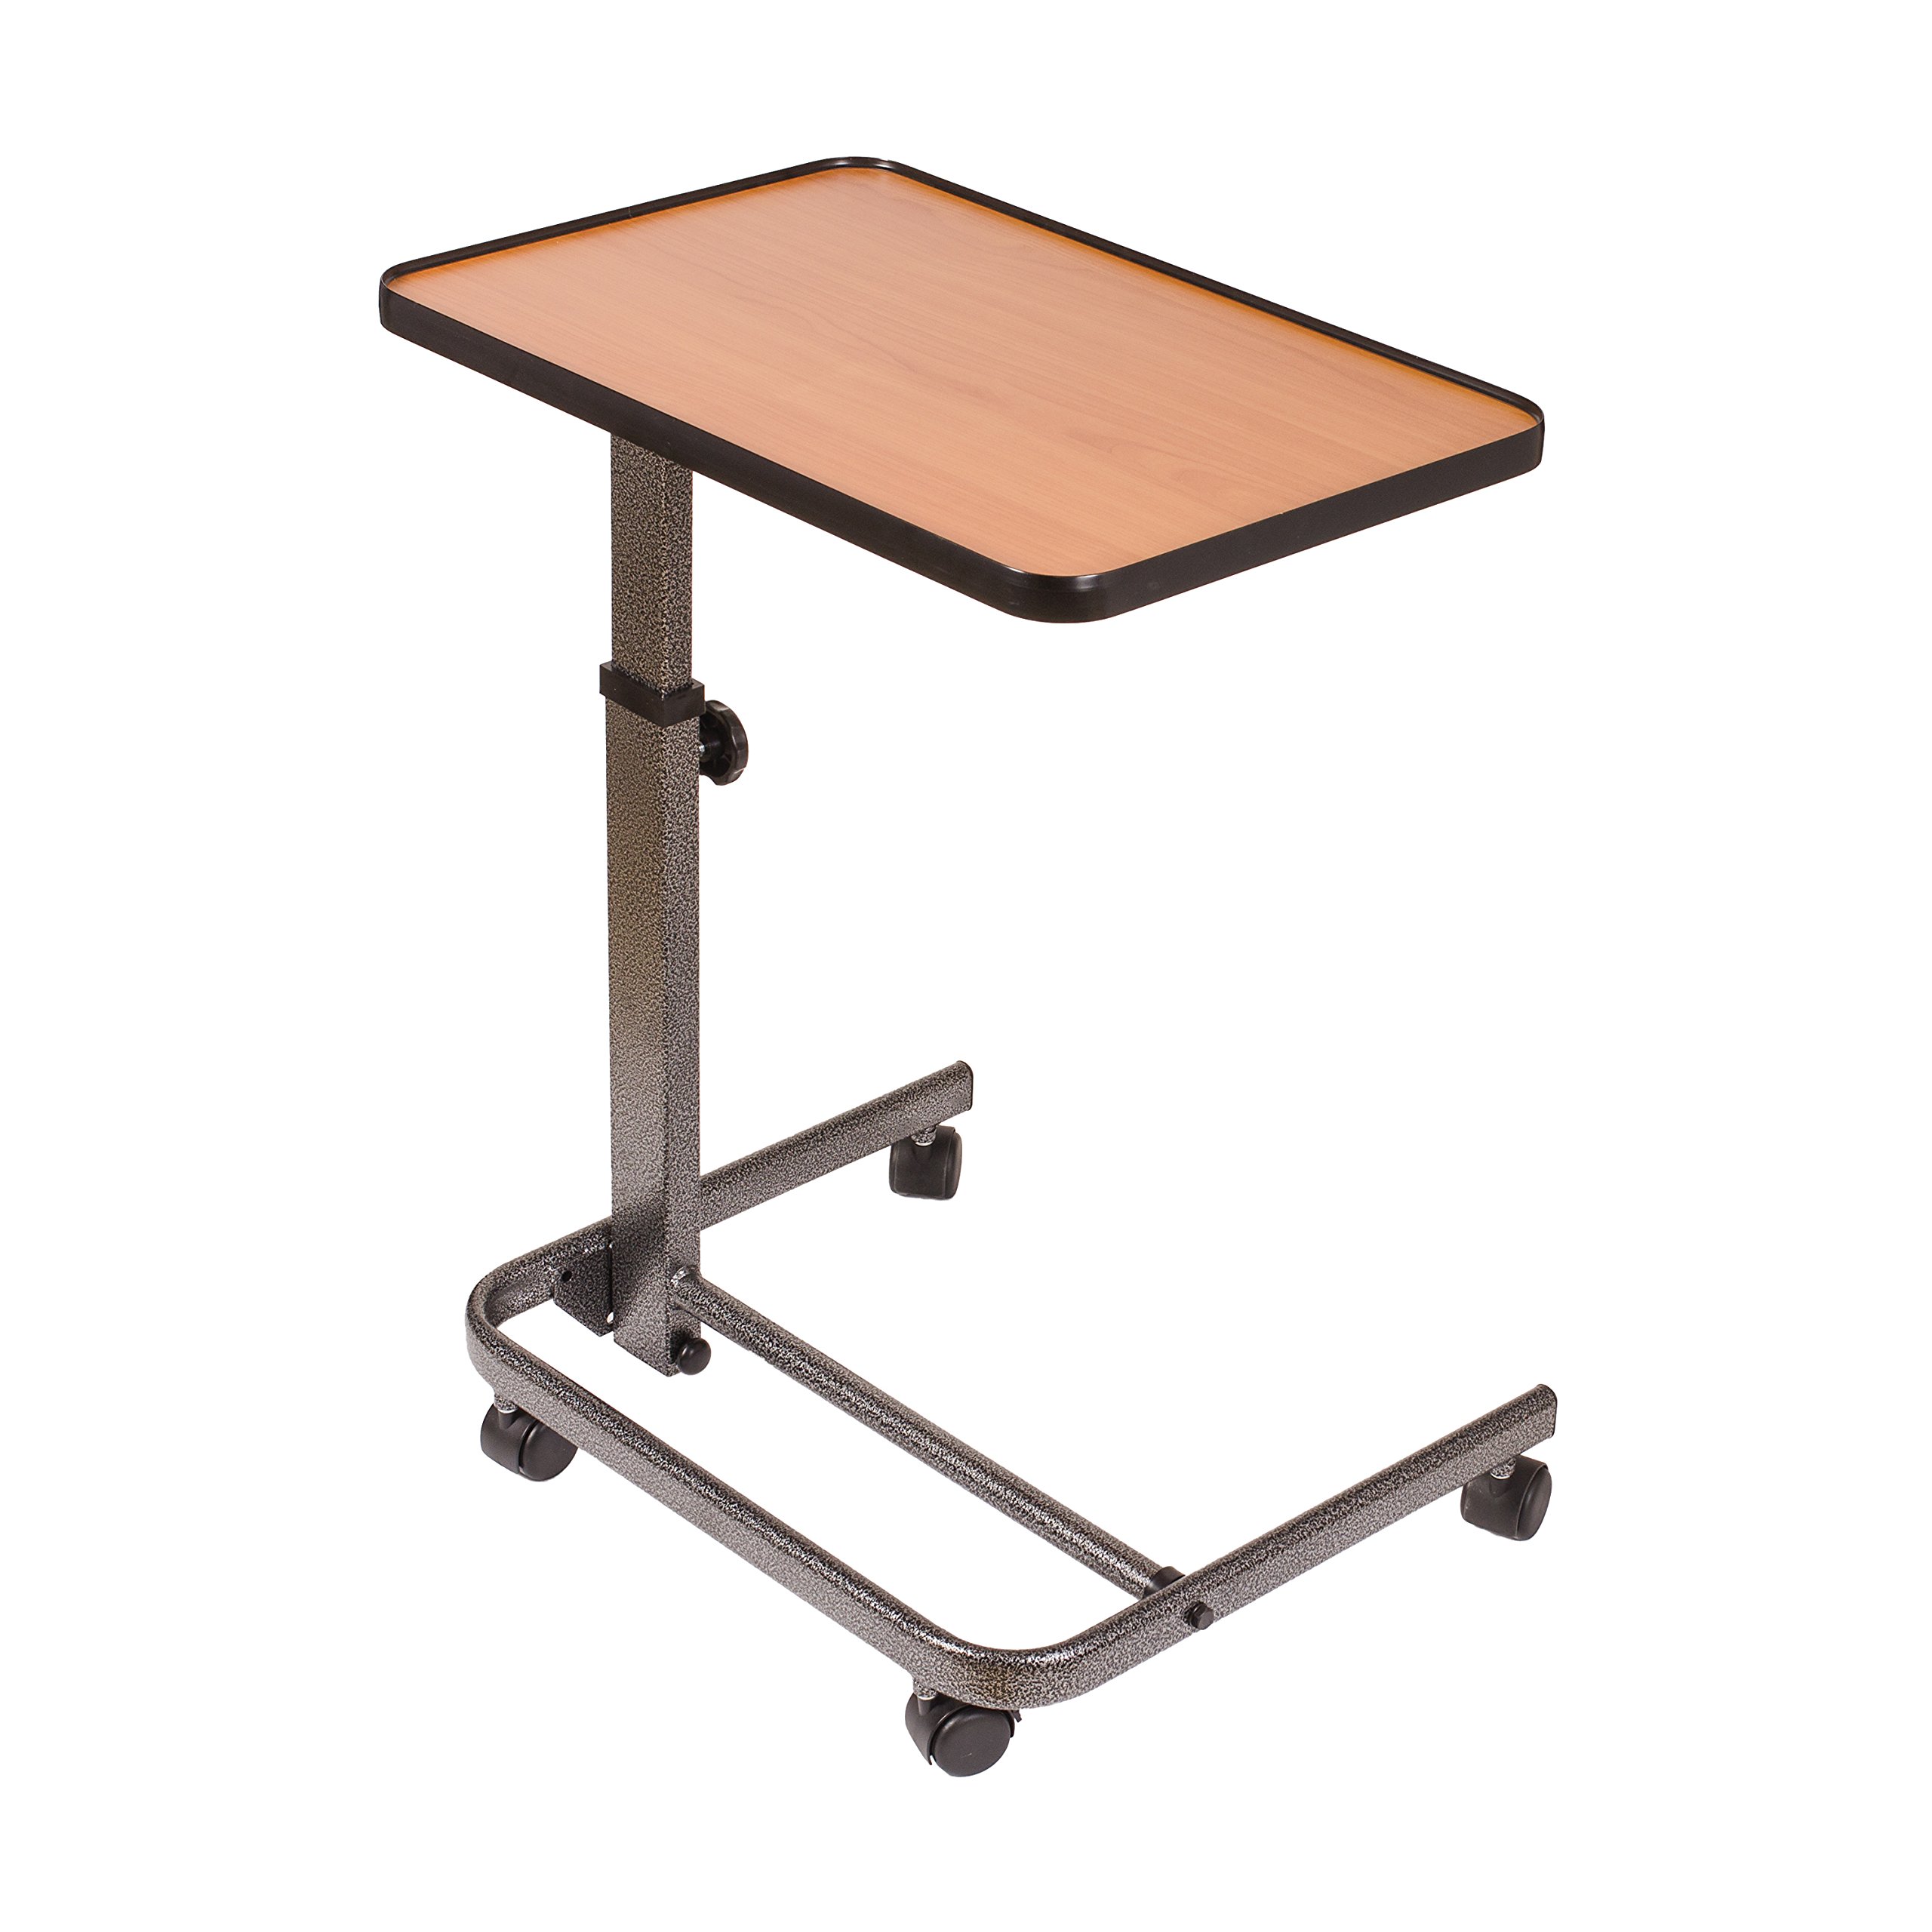 DMI Tilt-Top Overbed Table, Bedside Table with Wheels, Hospital Bed Table, Bed Trays for Eating, Bed Trays, Rolling Tray Height 25.5